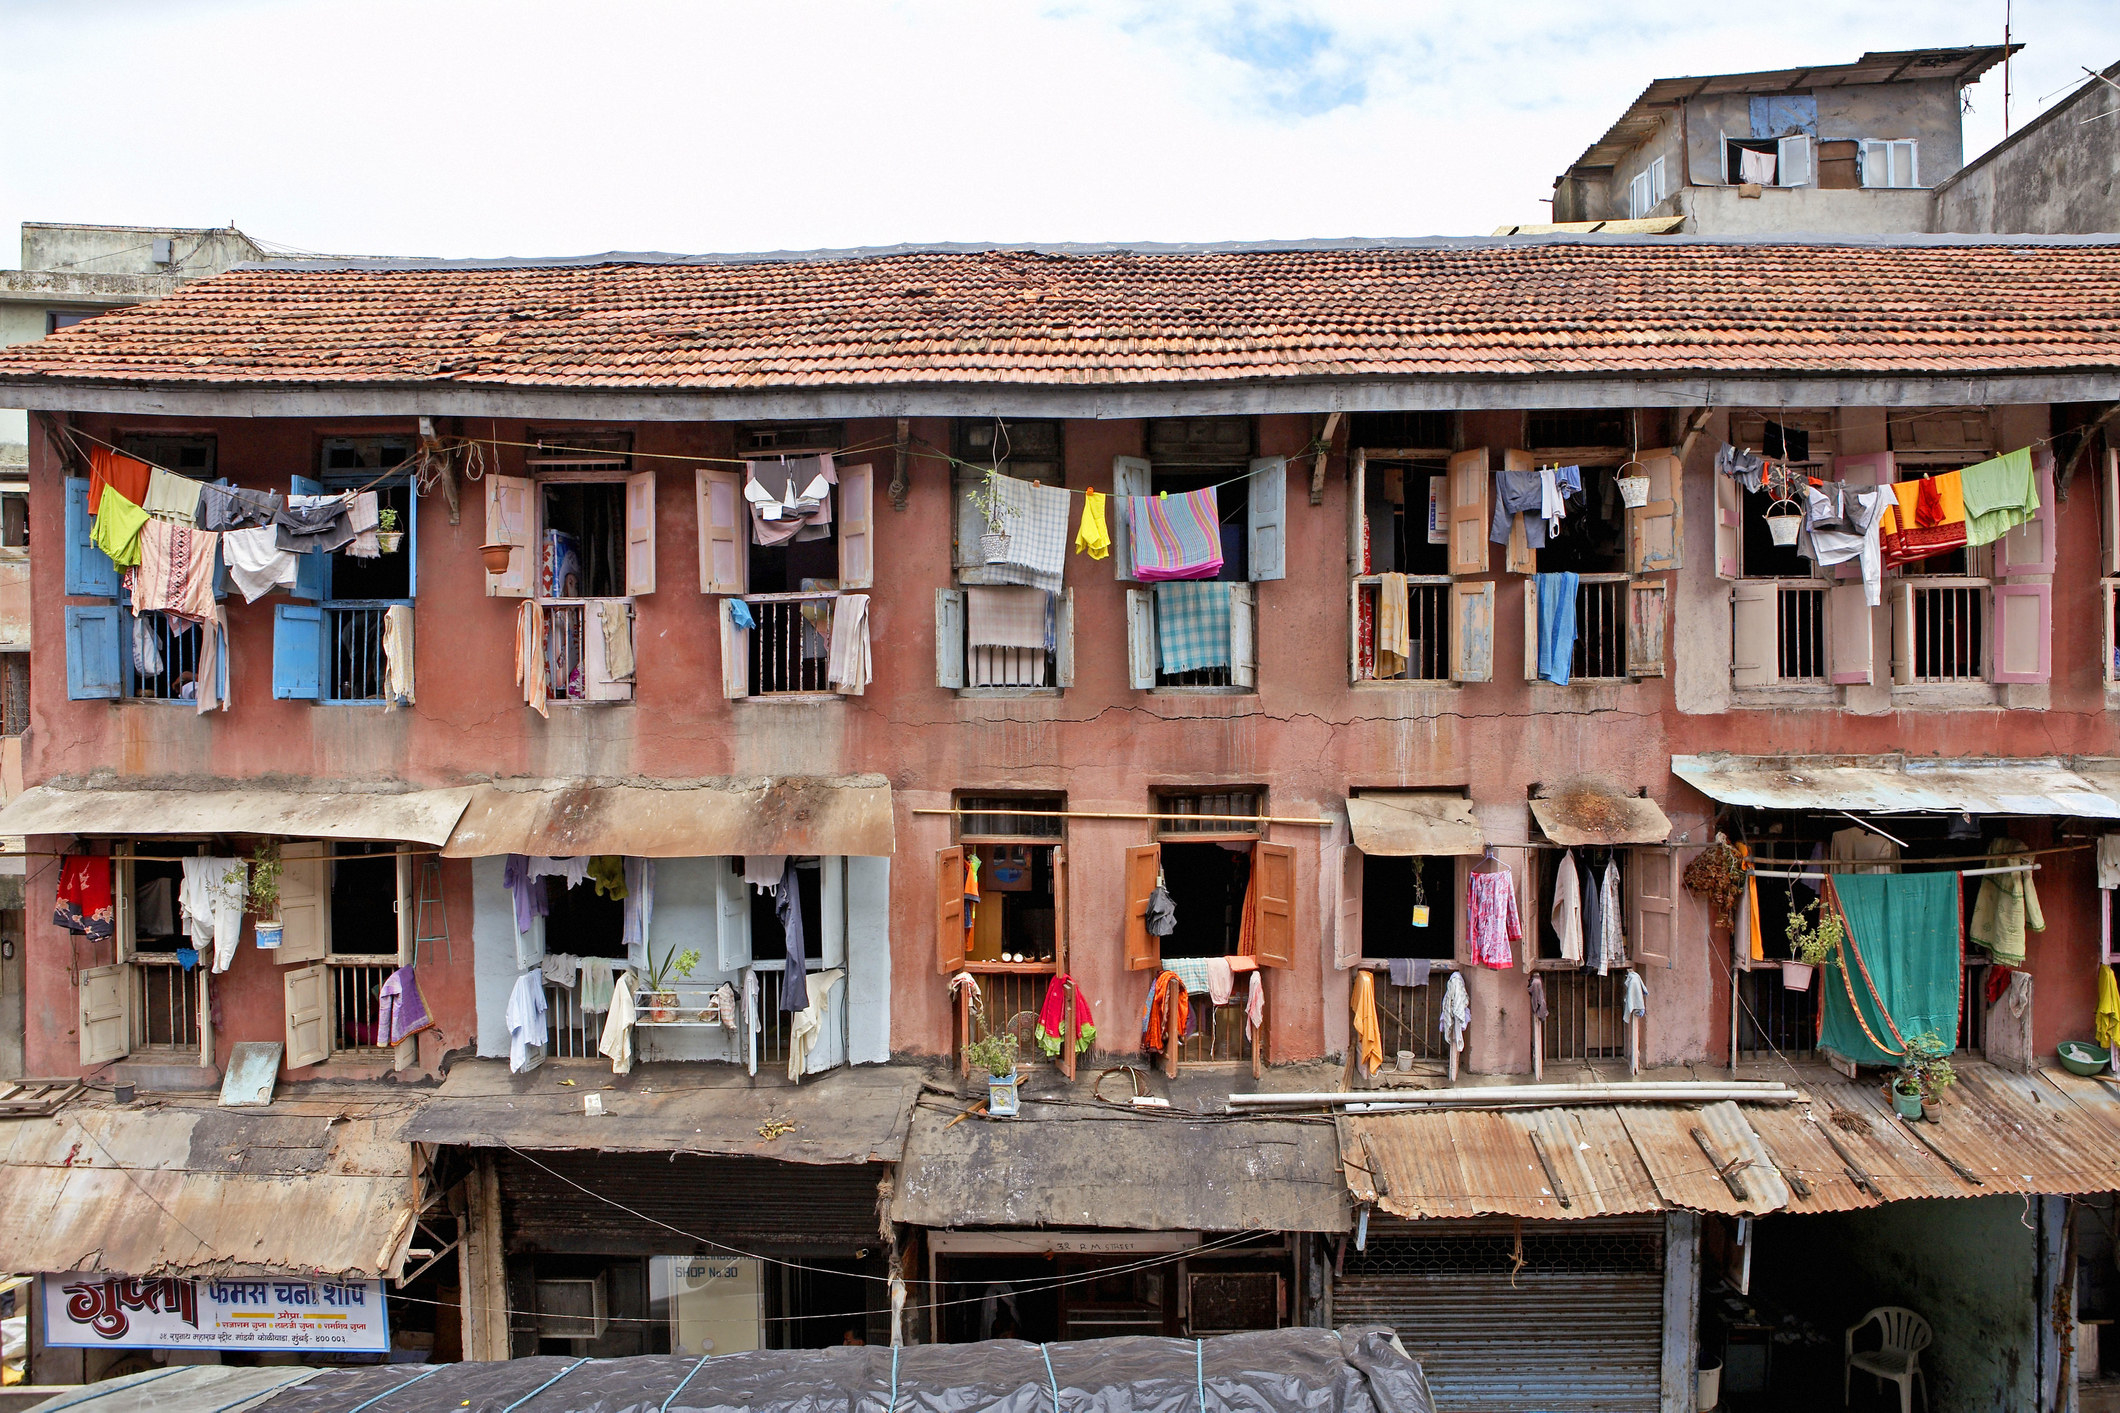 A multi-family home in India with laundry drying out the windows